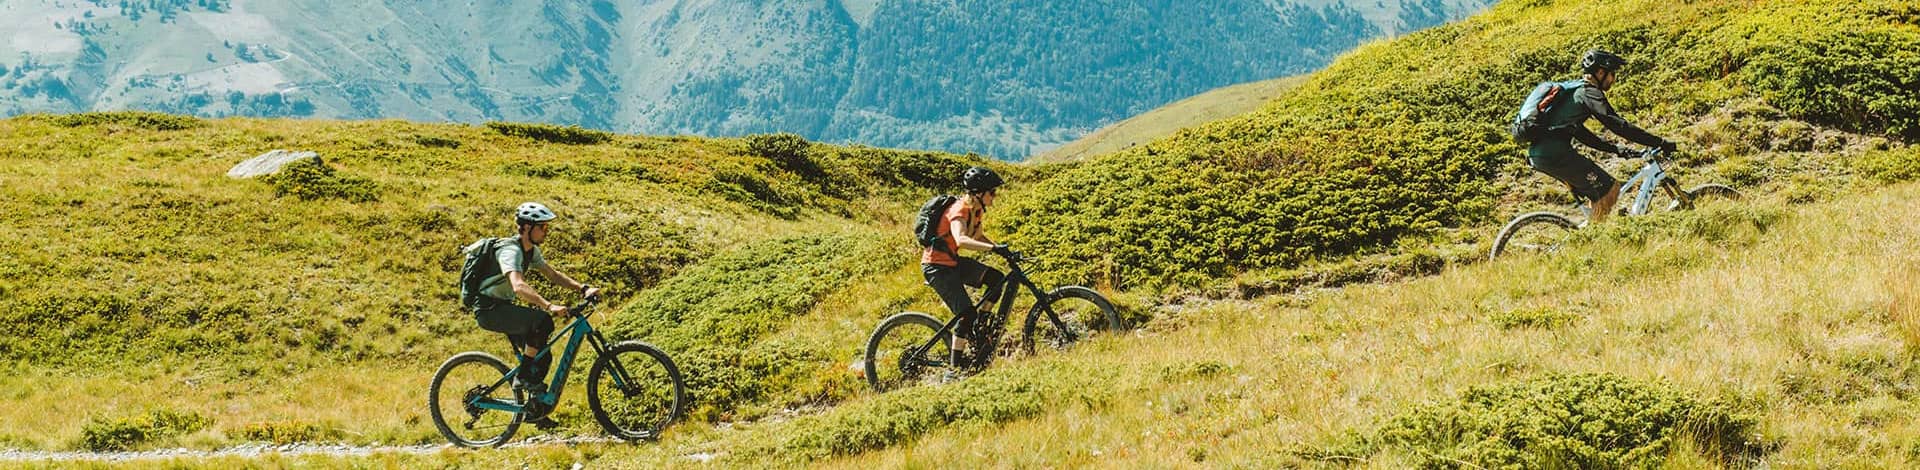 Ride a whole day in Les 3 Vallées thanks to the 1-day mountain bike pass